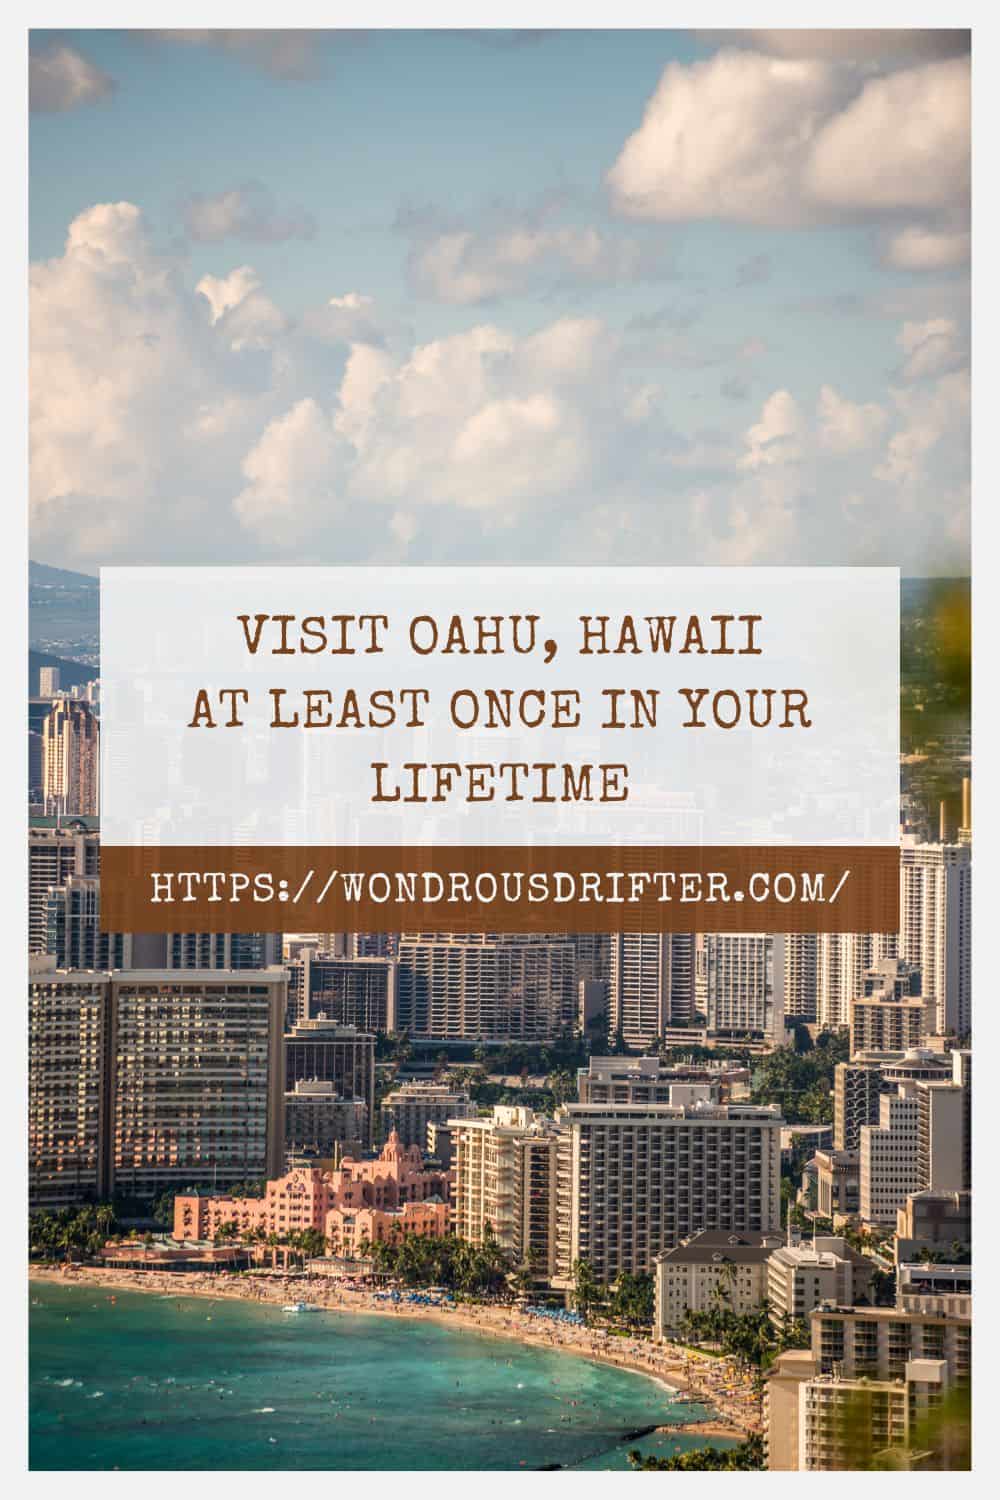 Visit Oahu Hawaii at least once in your lifetime